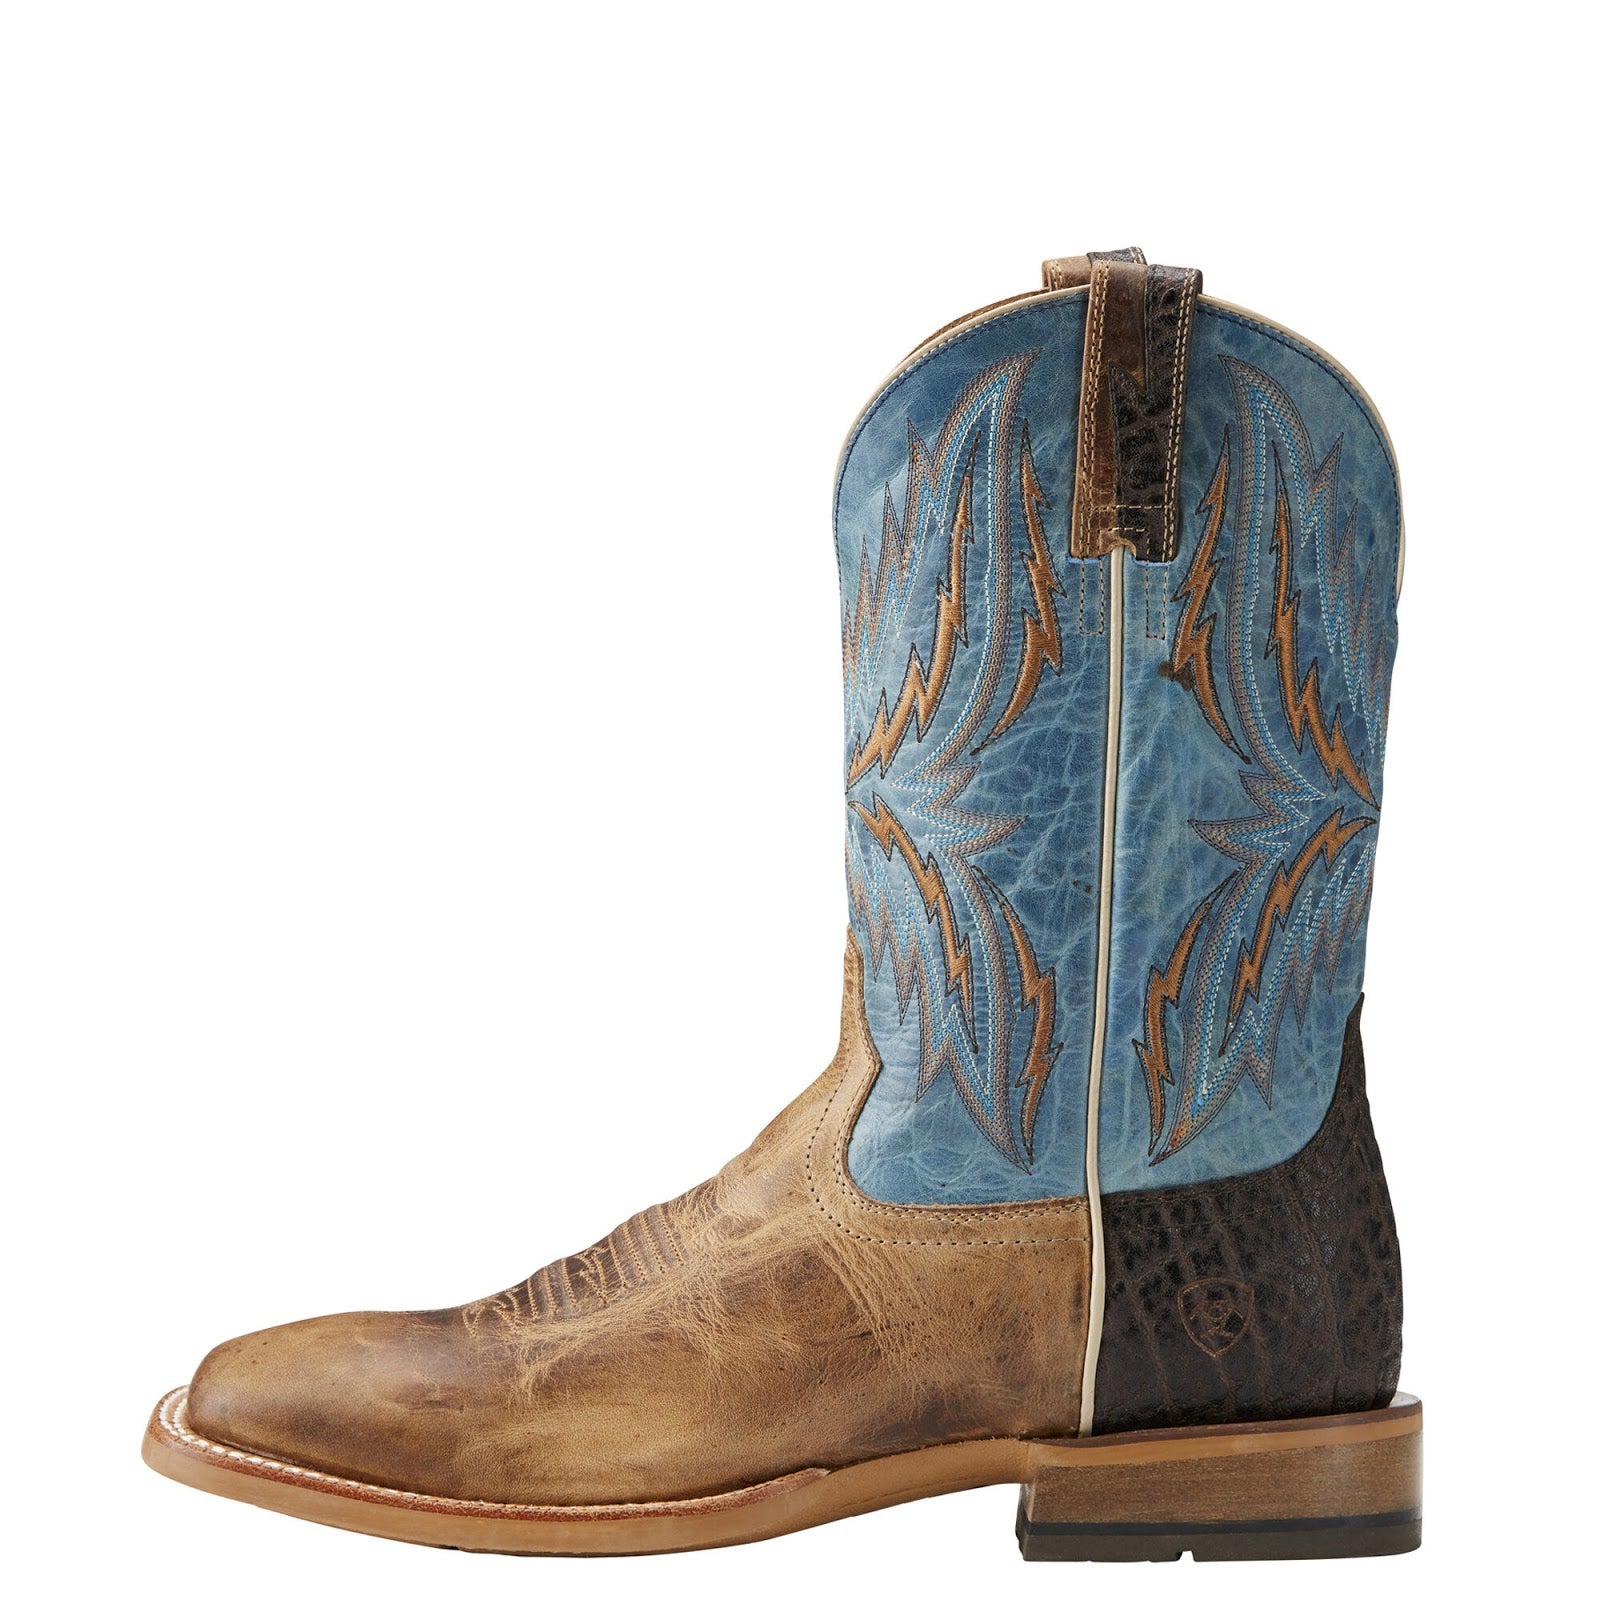 Ariat Men's Arena Rebound Dusted Wheat & Heritage Blue Boots